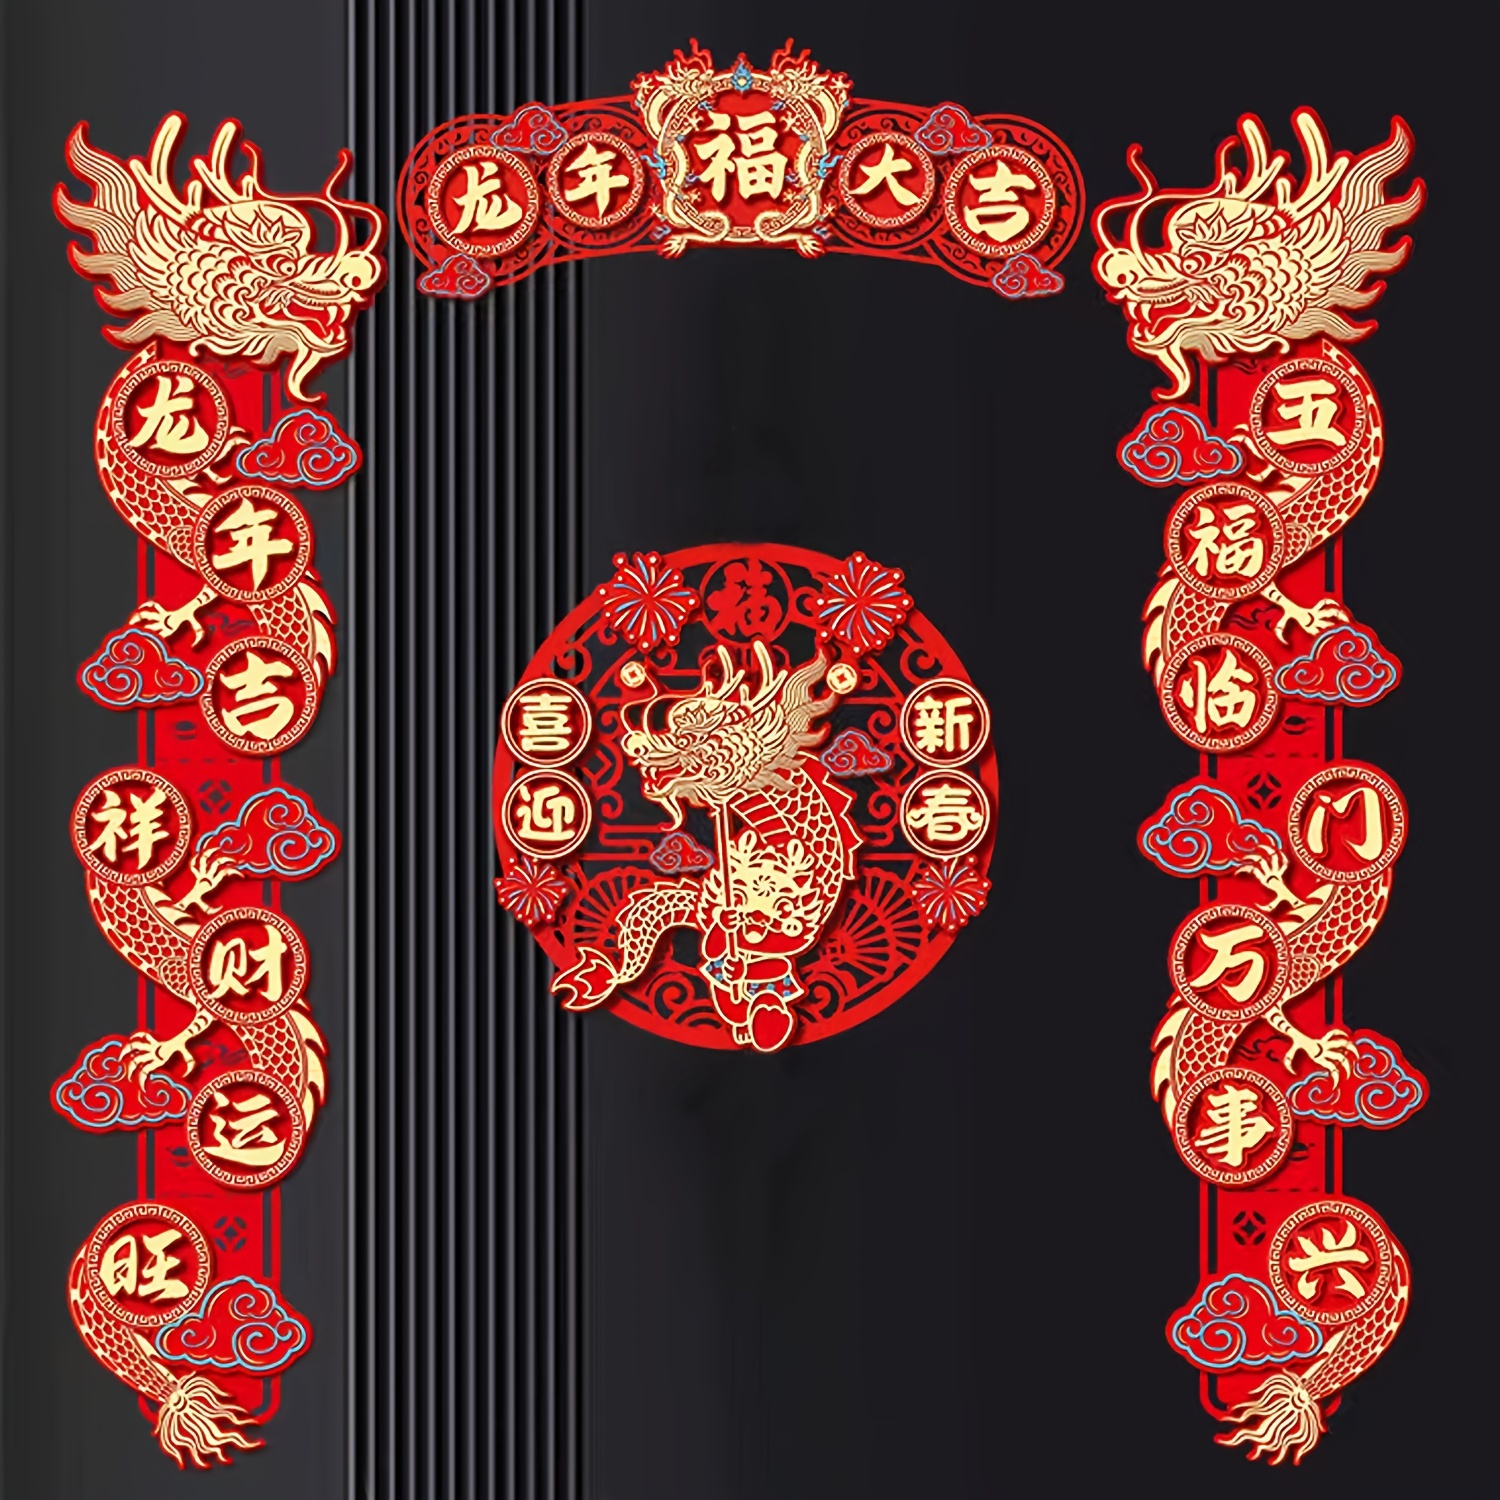 180 Chinese New Year Decor & Crafts ideas  chinese new year crafts,  chinese new year decorations, chinese new year